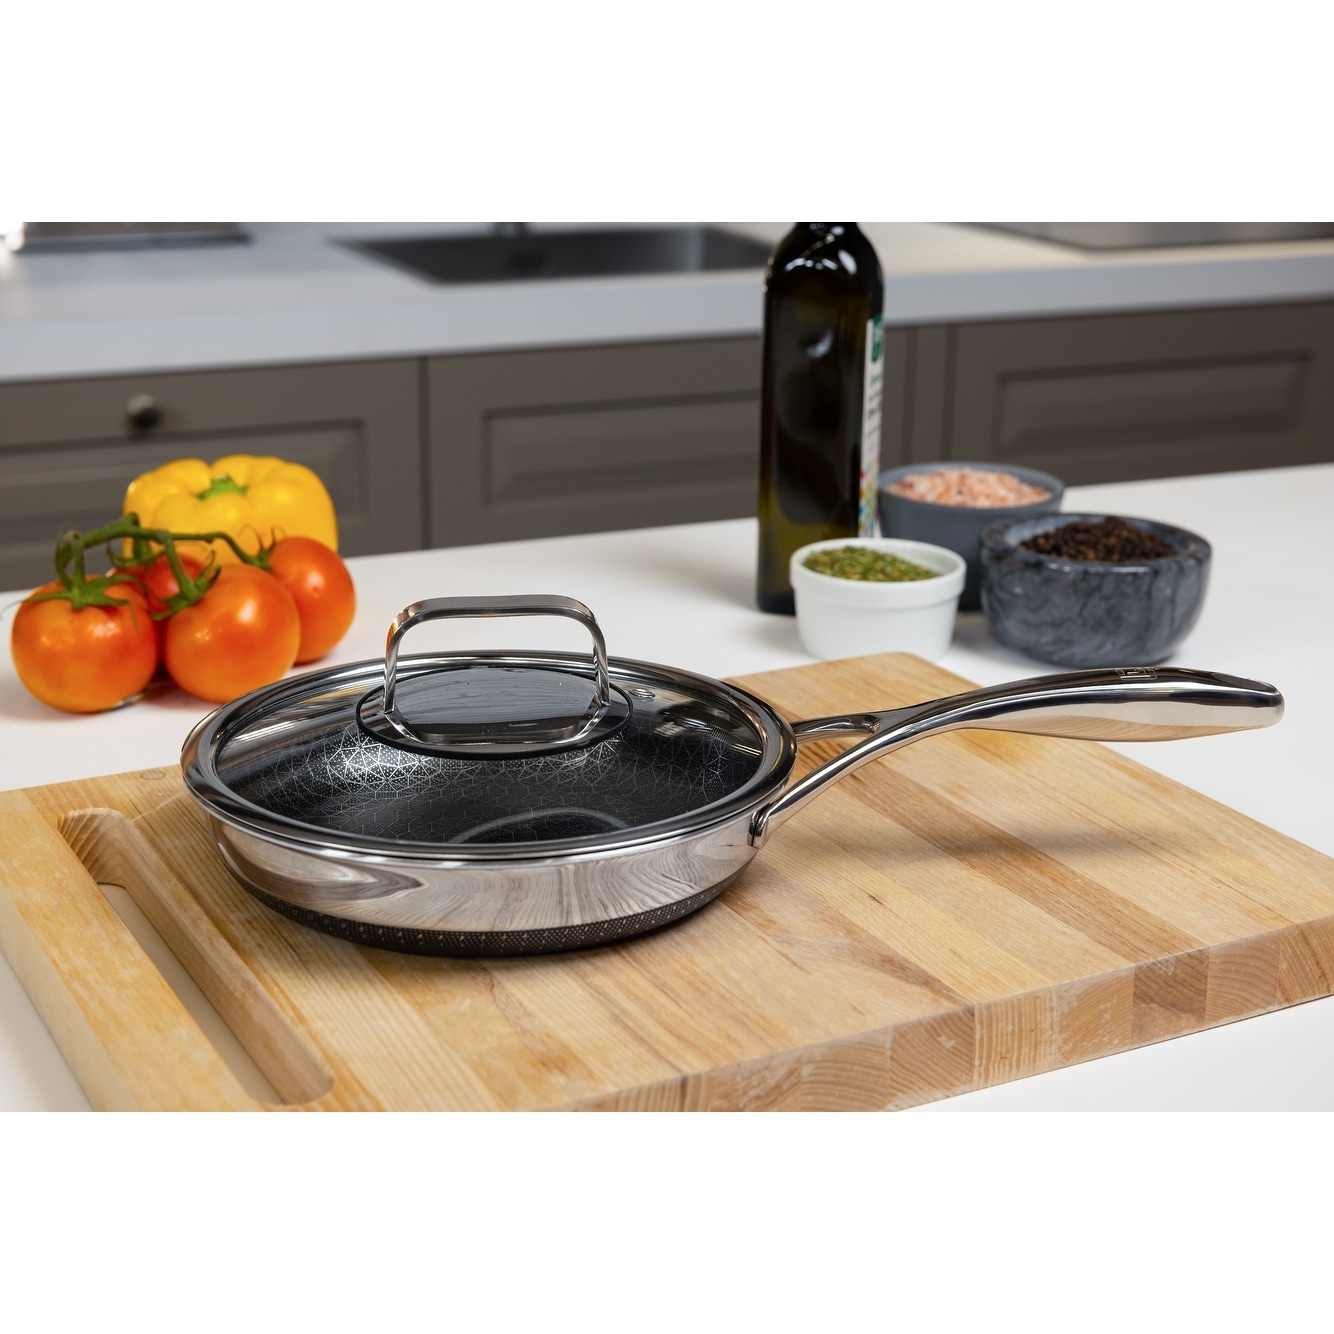 https://ak1.ostkcdn.com/images/products/is/images/direct/cc5820d075137bda62759bb03beb9e0596f34ba2/DiamondClad-by-Livwell-Hybrid-Nonstick-Frying-Pan-Set-with-Tempered-Glass-Lid%2C-Dishwasher-Safe%2C-Cool-Touch-Handle%2C-PFOA-free.jpg